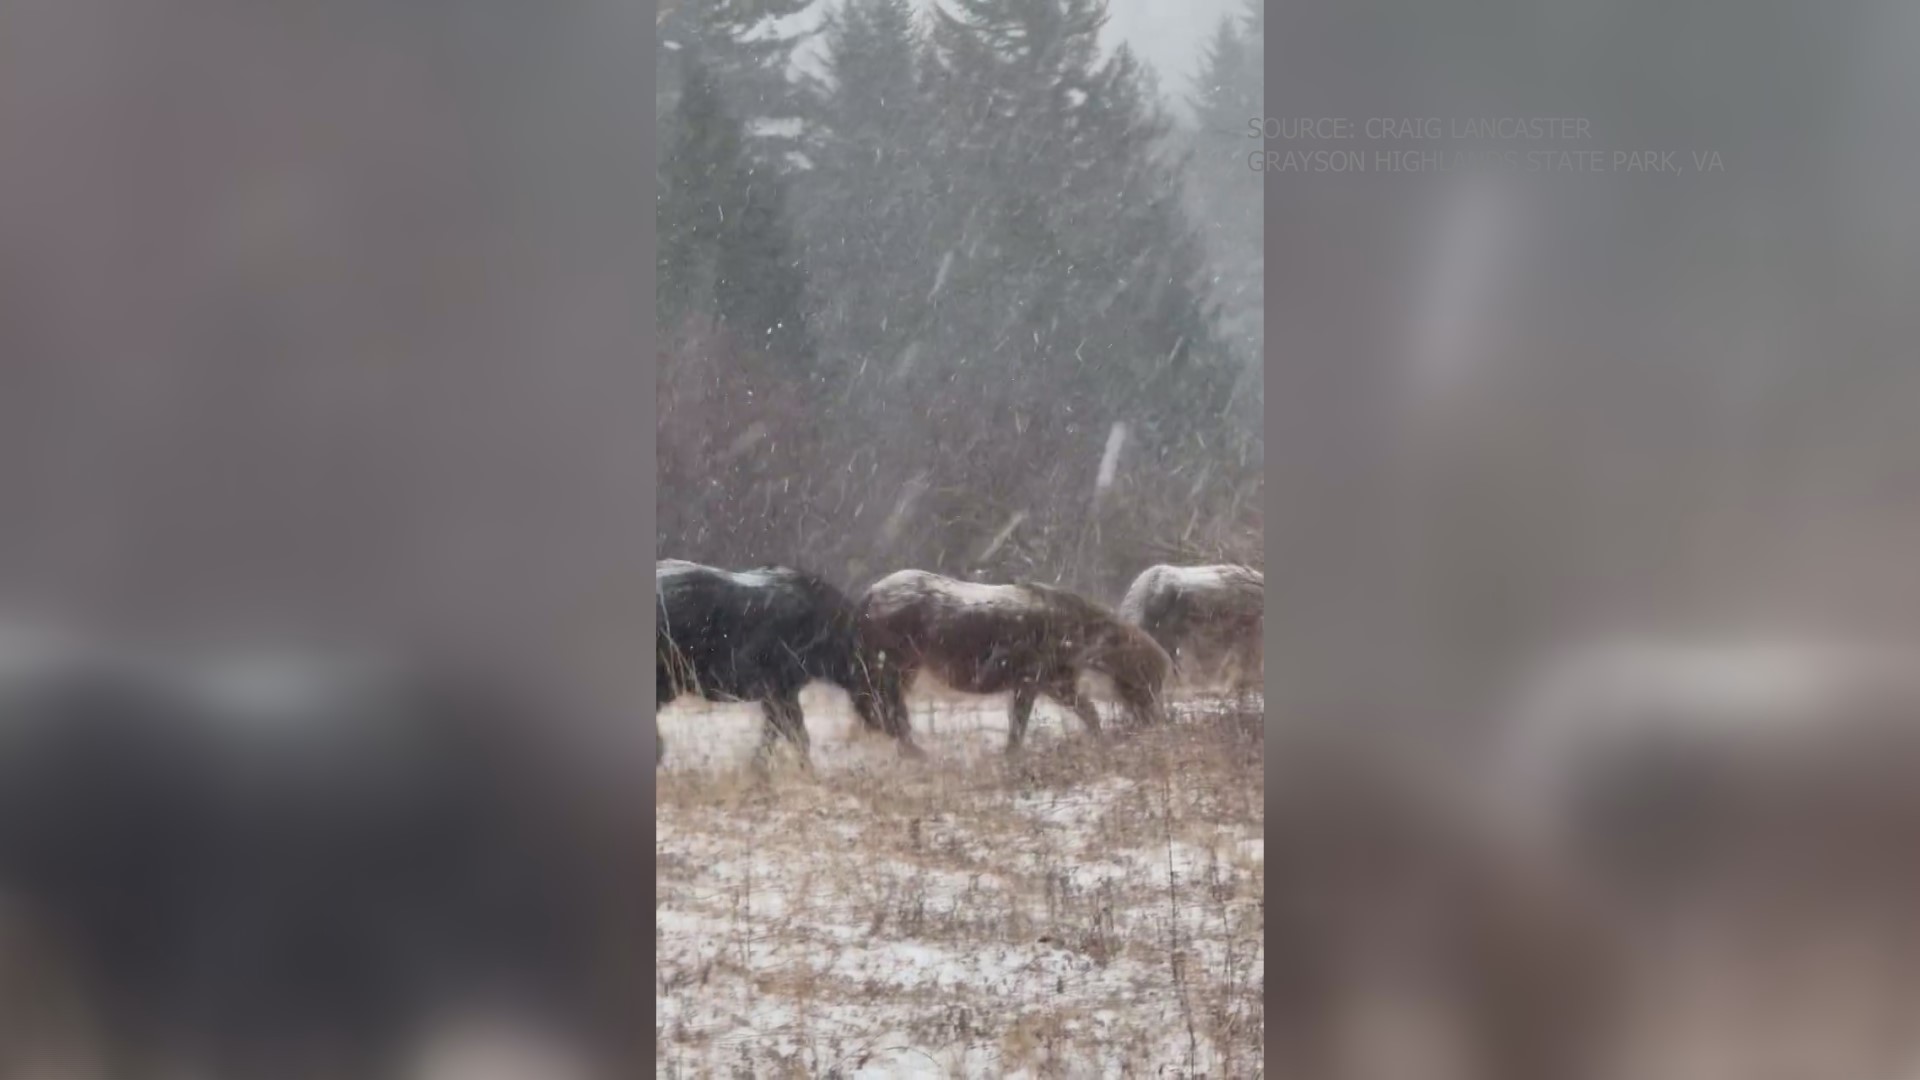 One viewer saw wild ponies enjoying the snow in Virginia. Others shared pretty scenes near Boone, NC.